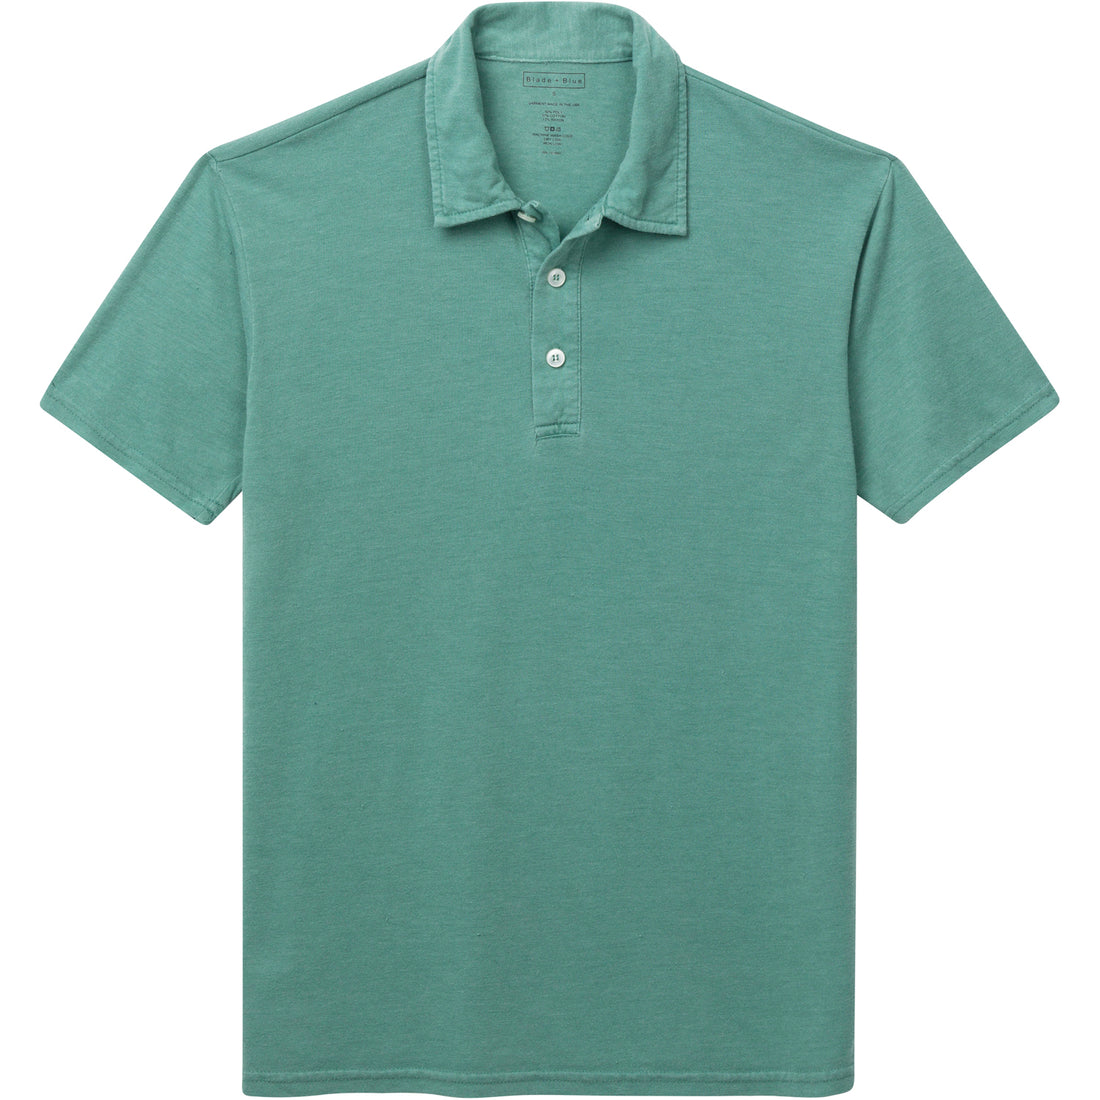 Jersey Polo Shirt in Tri-Blend Sprucestone Green - Made in USA